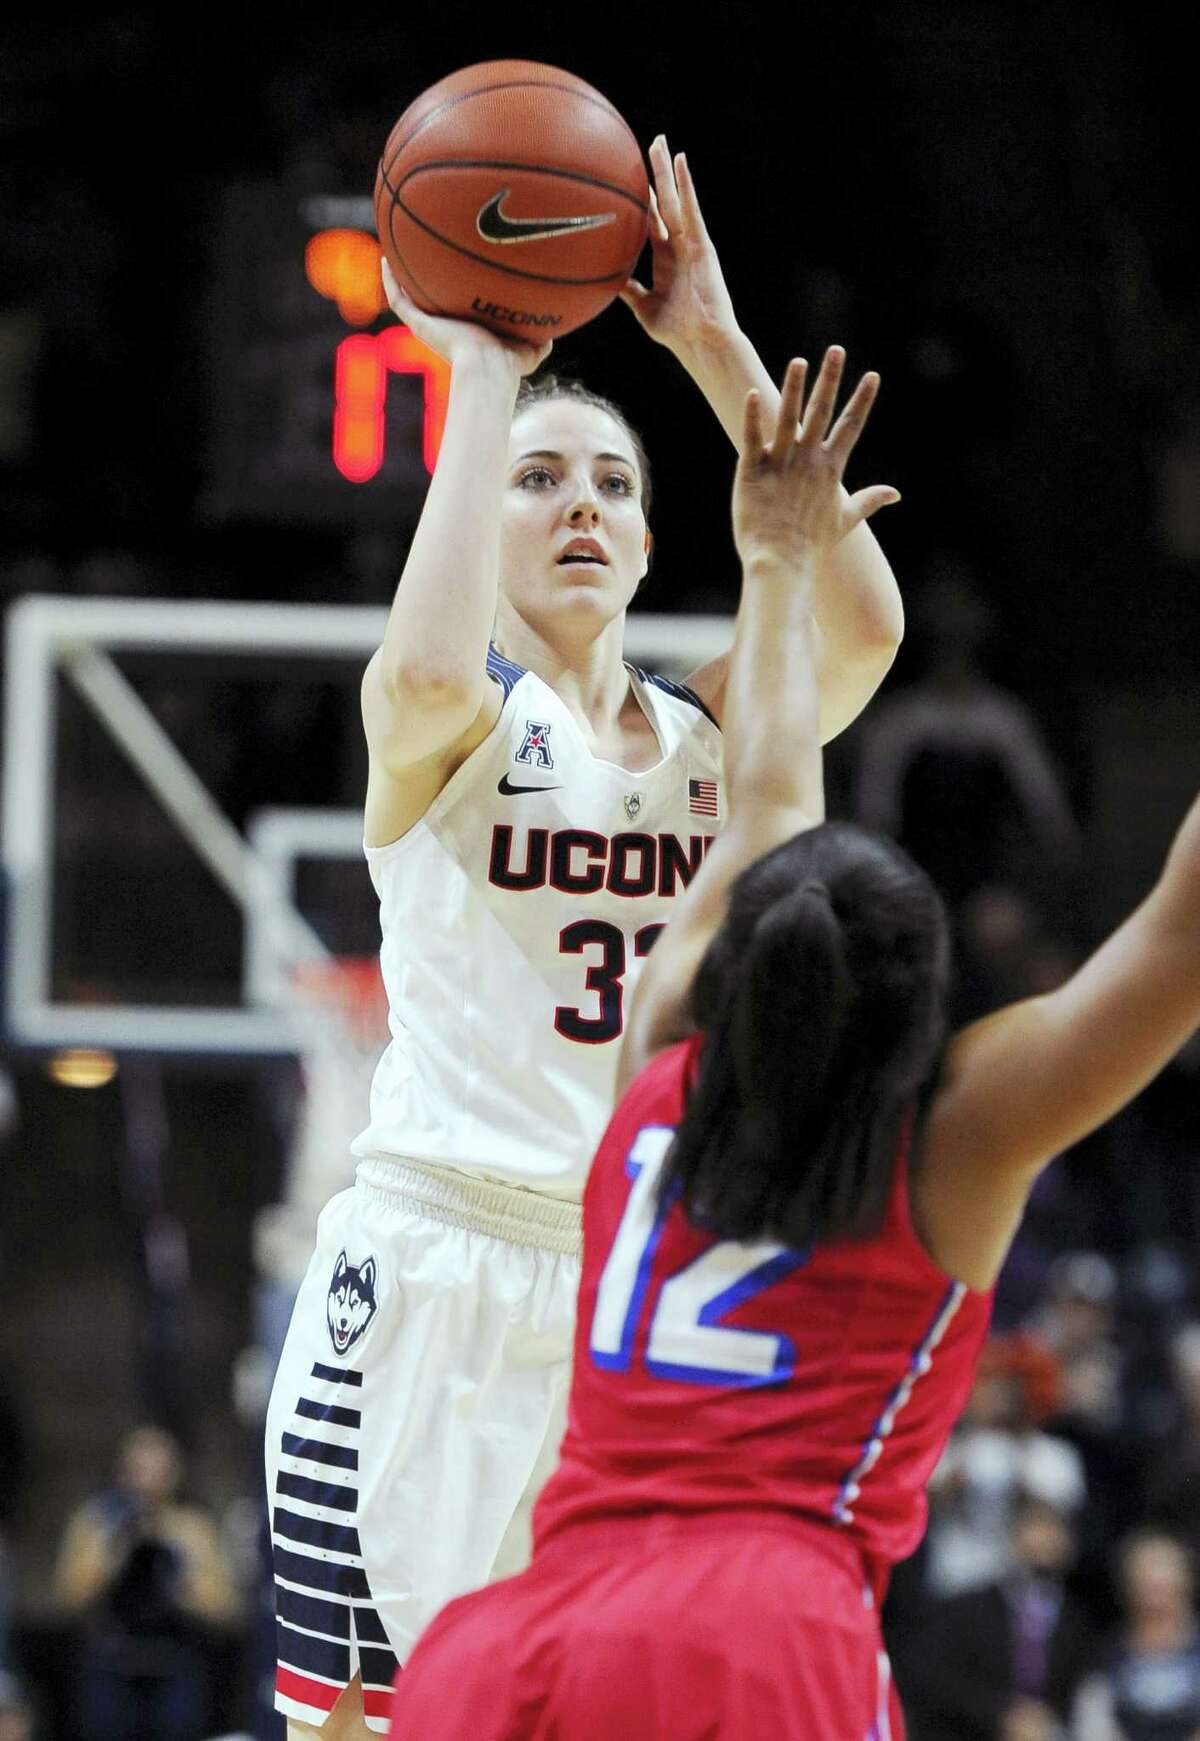 UConn freshman Katie Lou Samuelson shoots over SMU’s Morgan Bolton during the first half Wednesday en route to tying her career high with 21 points.